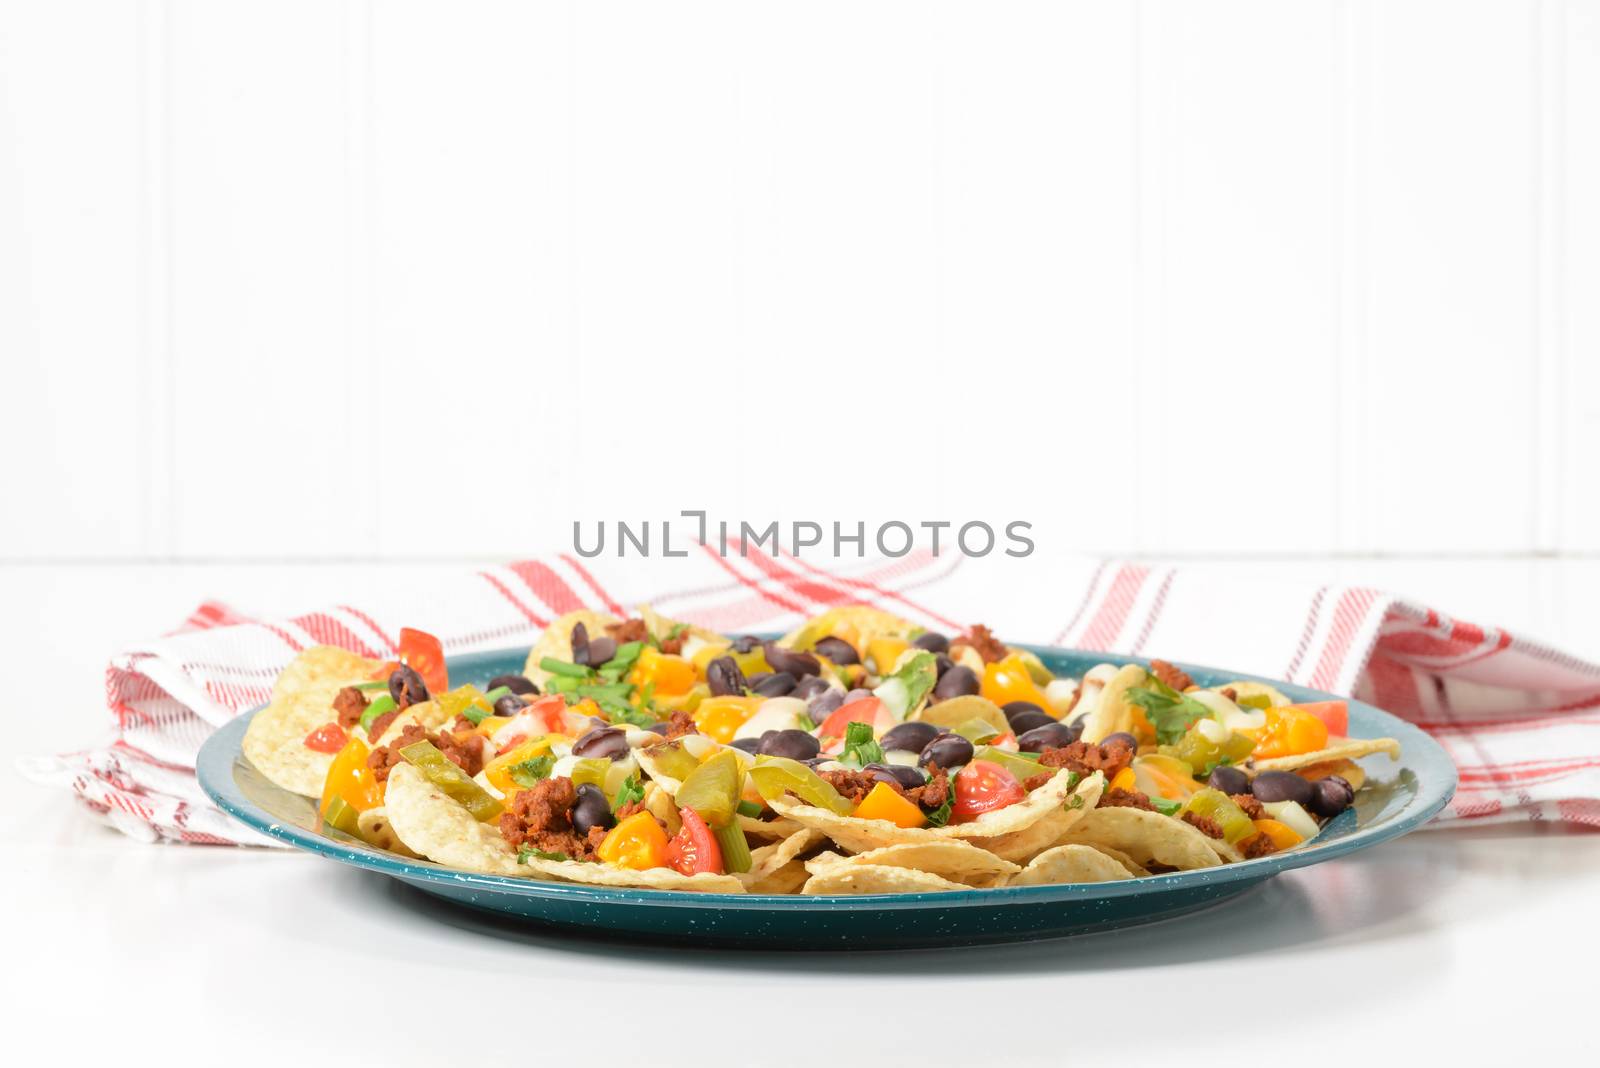 Delicious Nacho Platter by billberryphotography